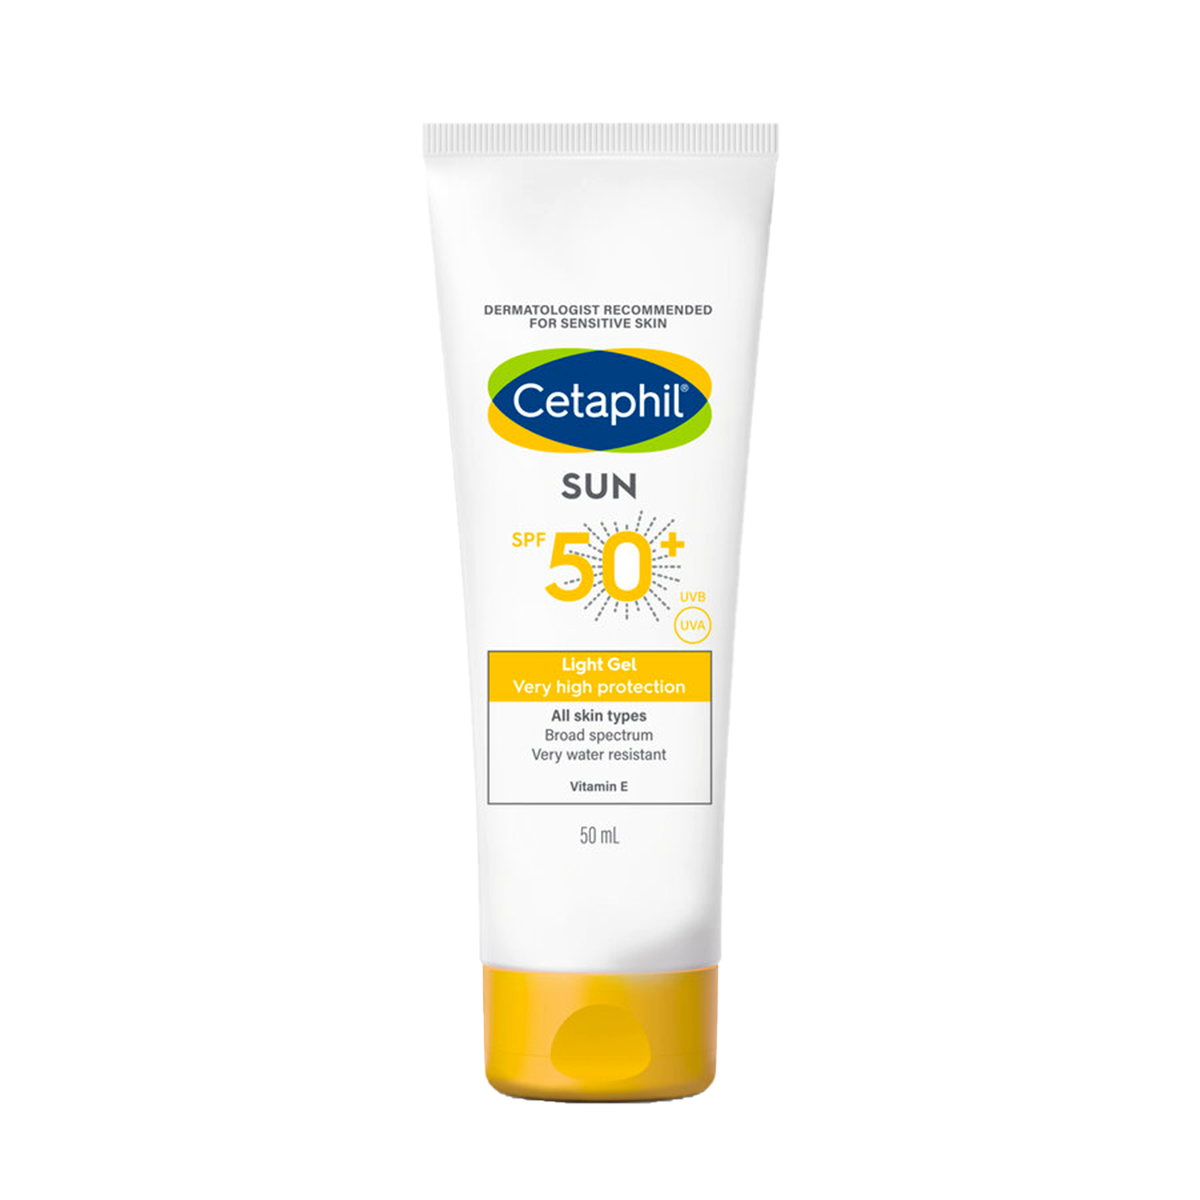 First product image of Cetaphil SUN SPF 50+ GEL 50ml